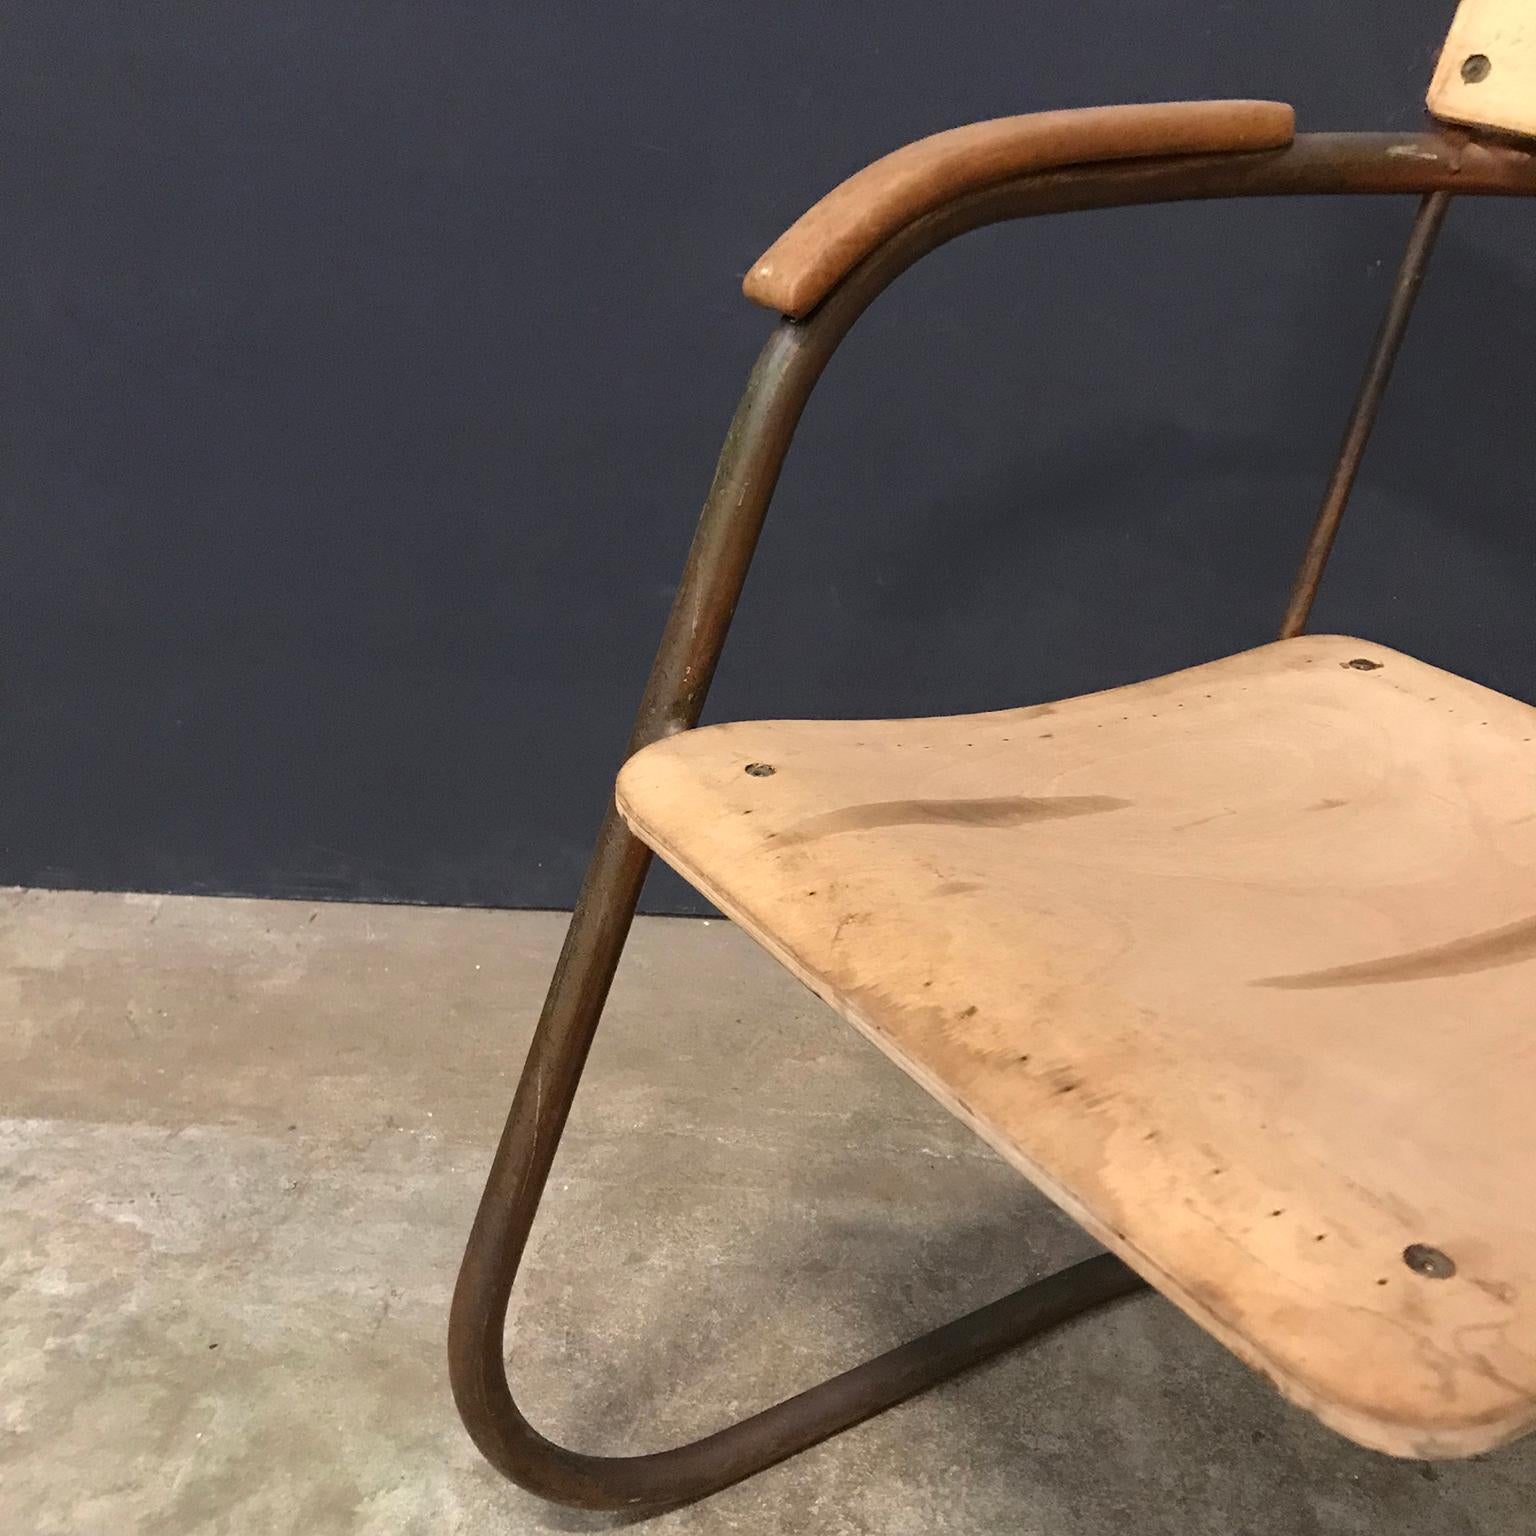 Paul Schuitema Tube Chair, Original in Copper and Upholstered Wood, circa 1930 For Sale 5